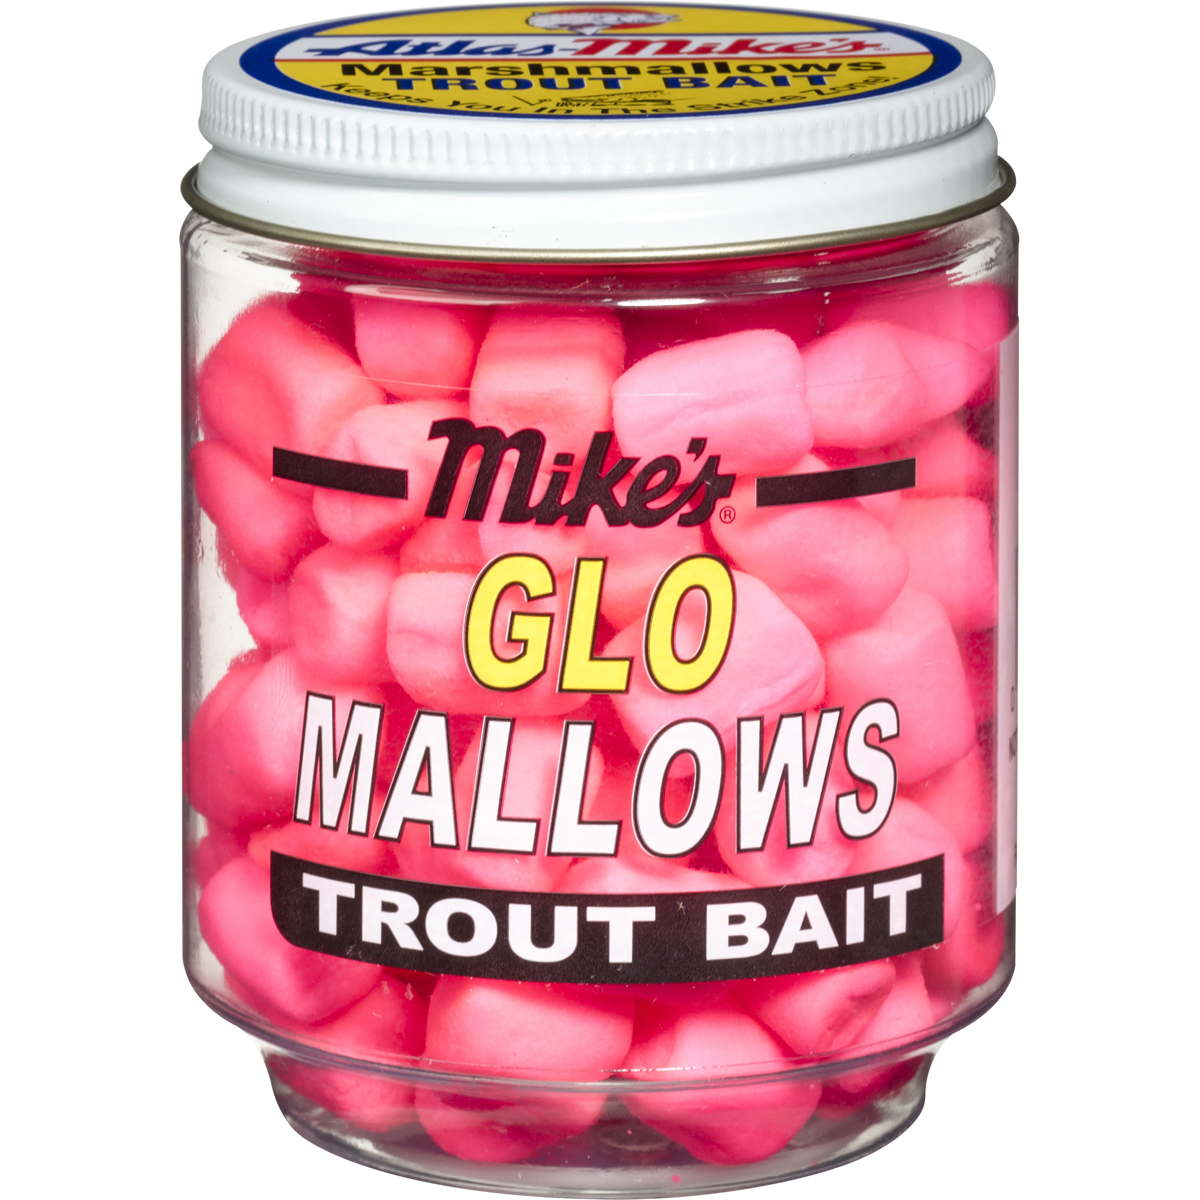 Photo of Atlas-Mike's Mike's Glo Mallows for sale at United Tackle Shops.